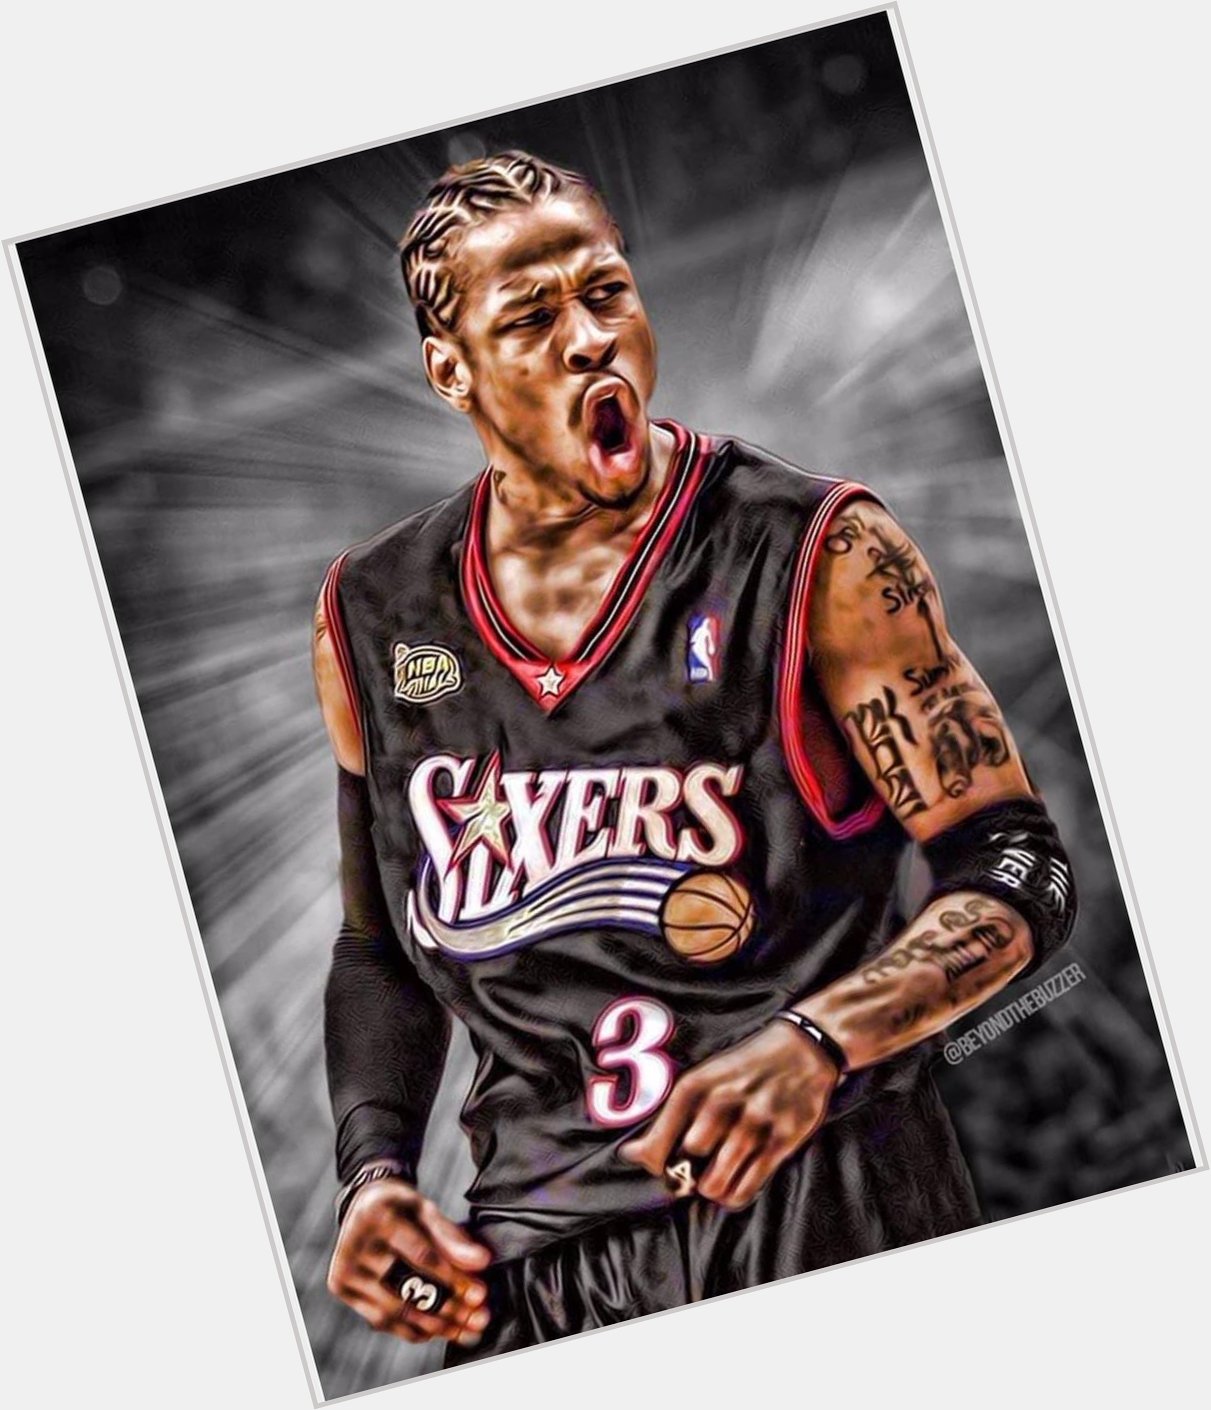 Happy 46th birthday to my favorite NBA player of all time Allen Iverson 